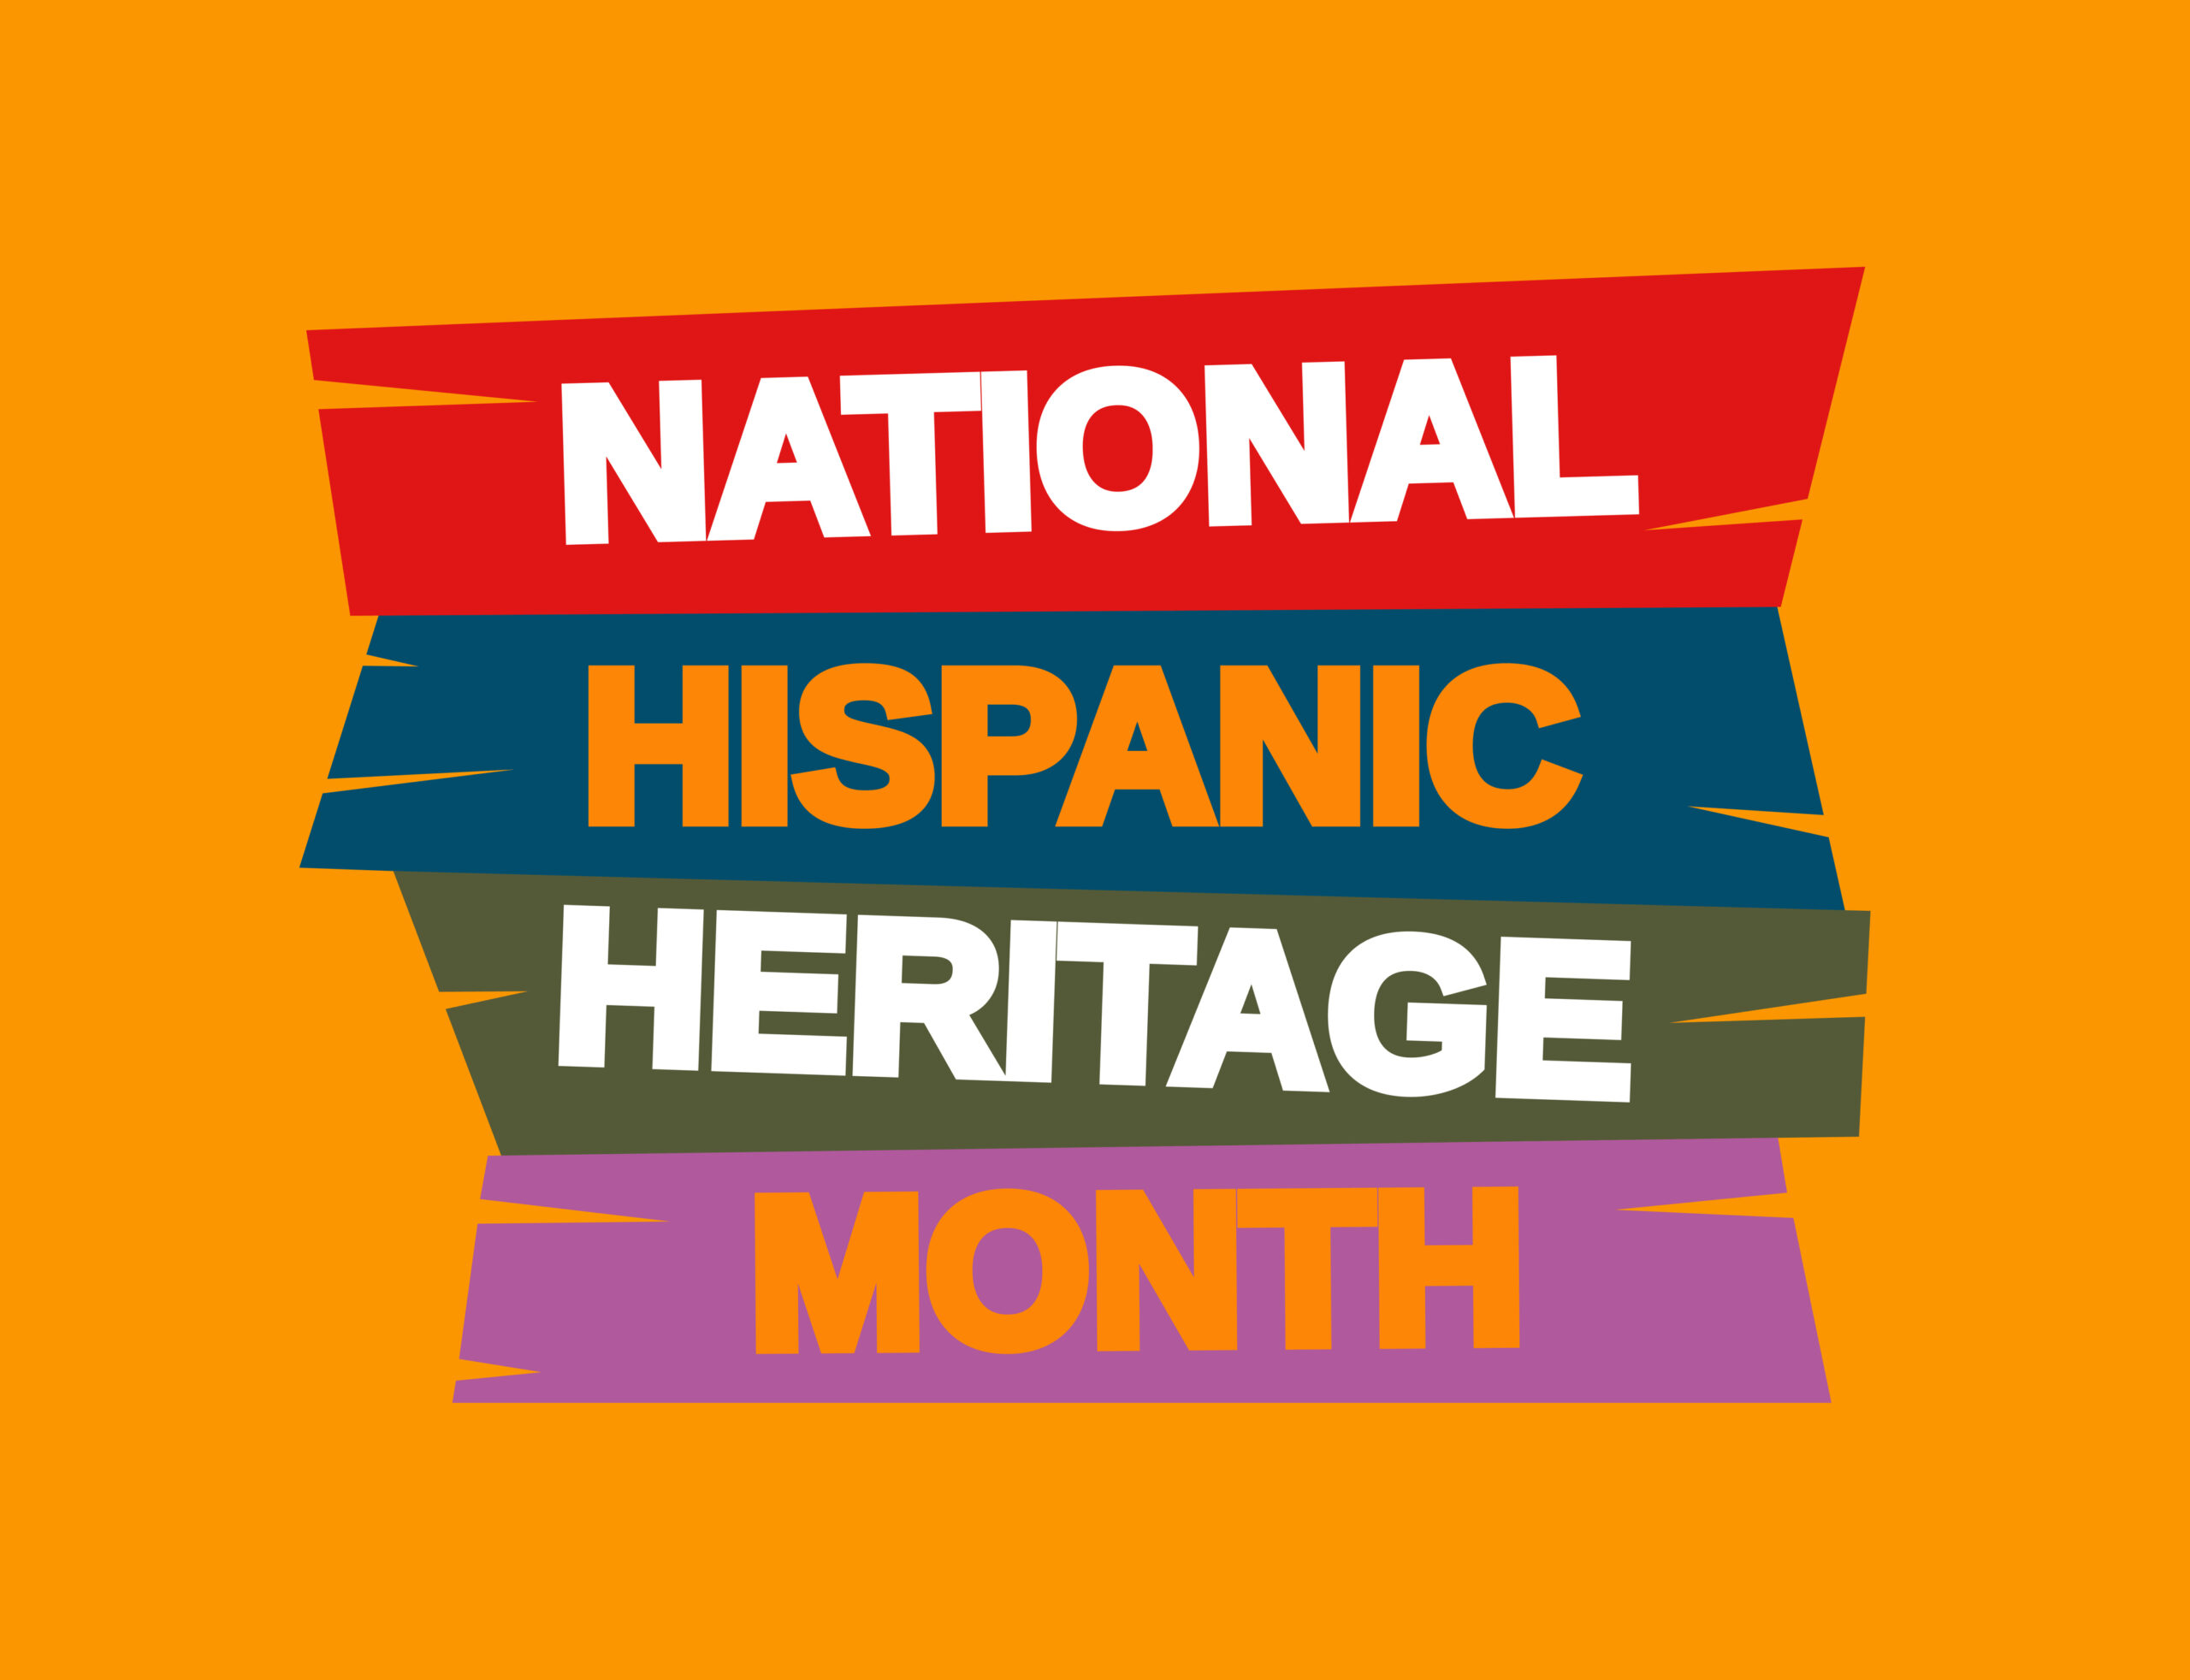 September 15 to October 15 Is National Hispanic Heritage Month - National  Council of Teachers of English